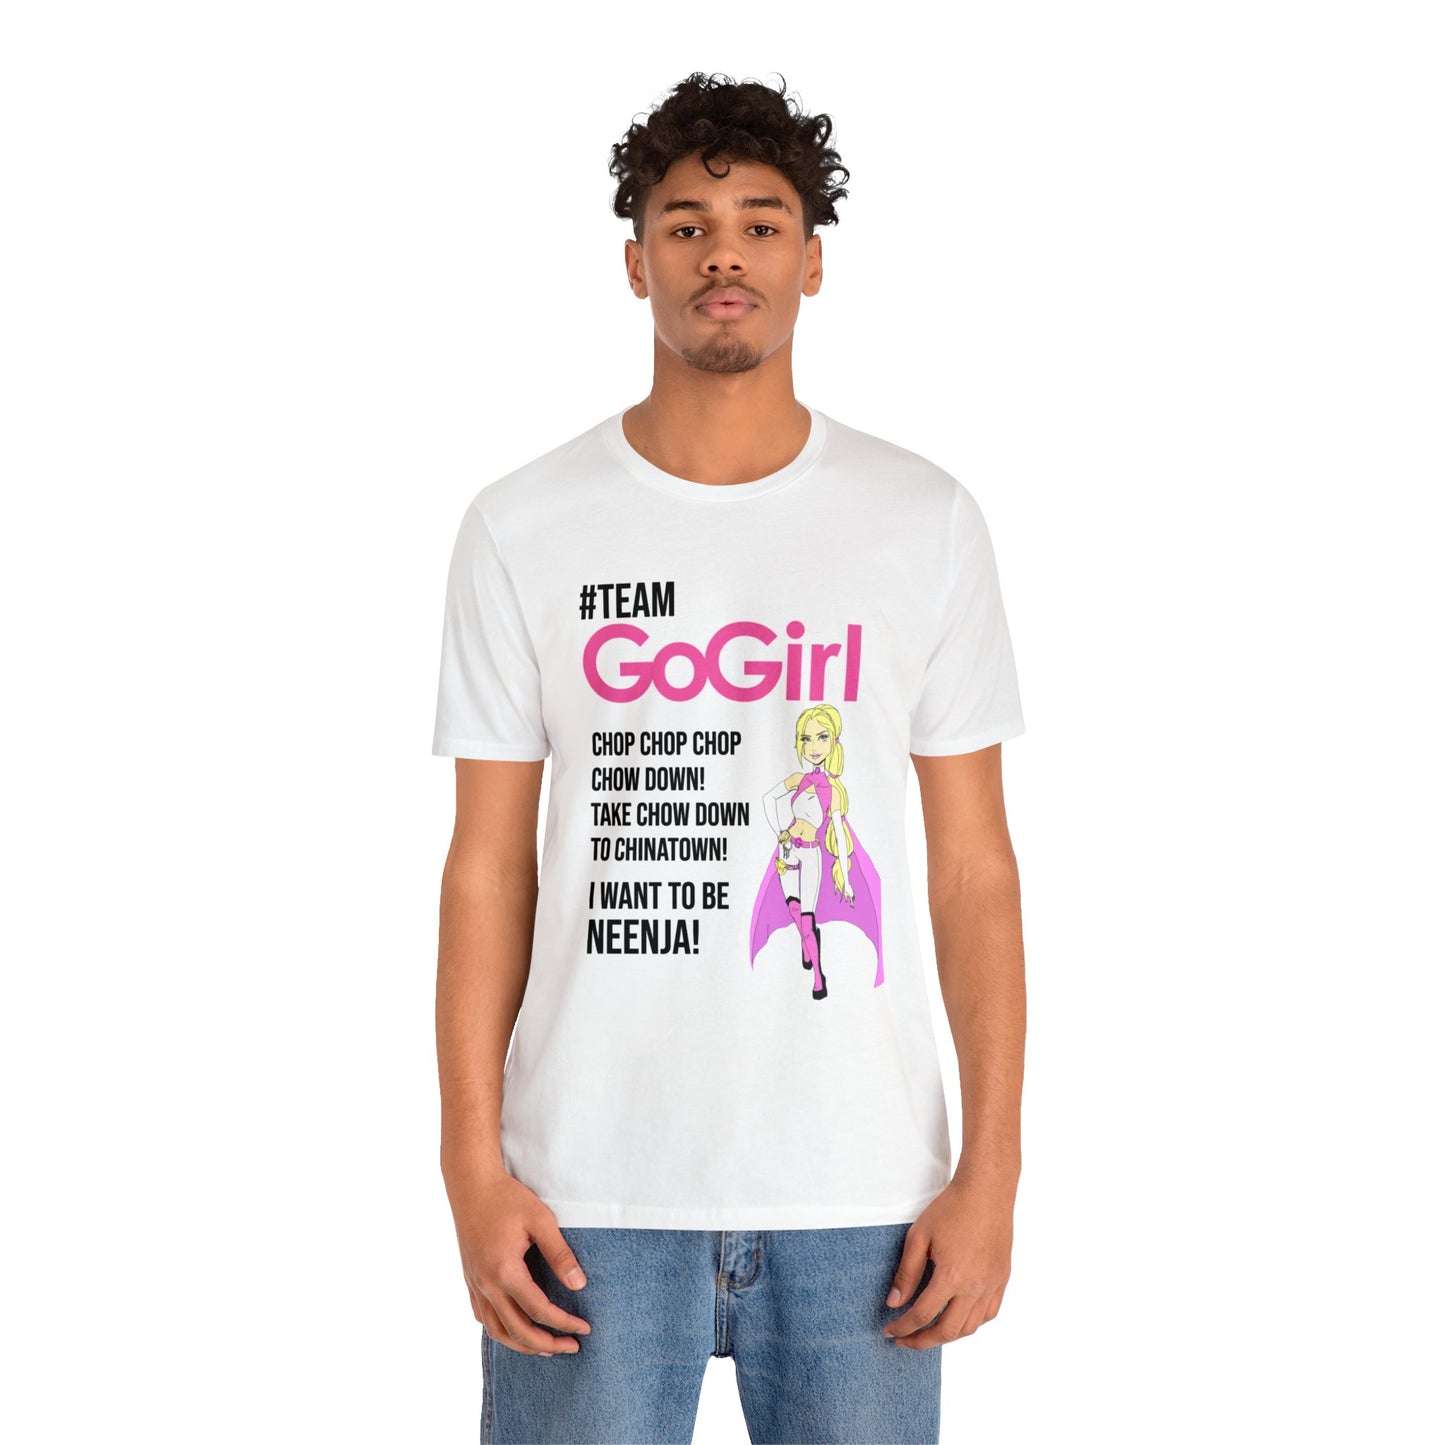 Team GoGirl Unisex Jersey Short Sleeve Tee (Perfect for movie viewing parties)